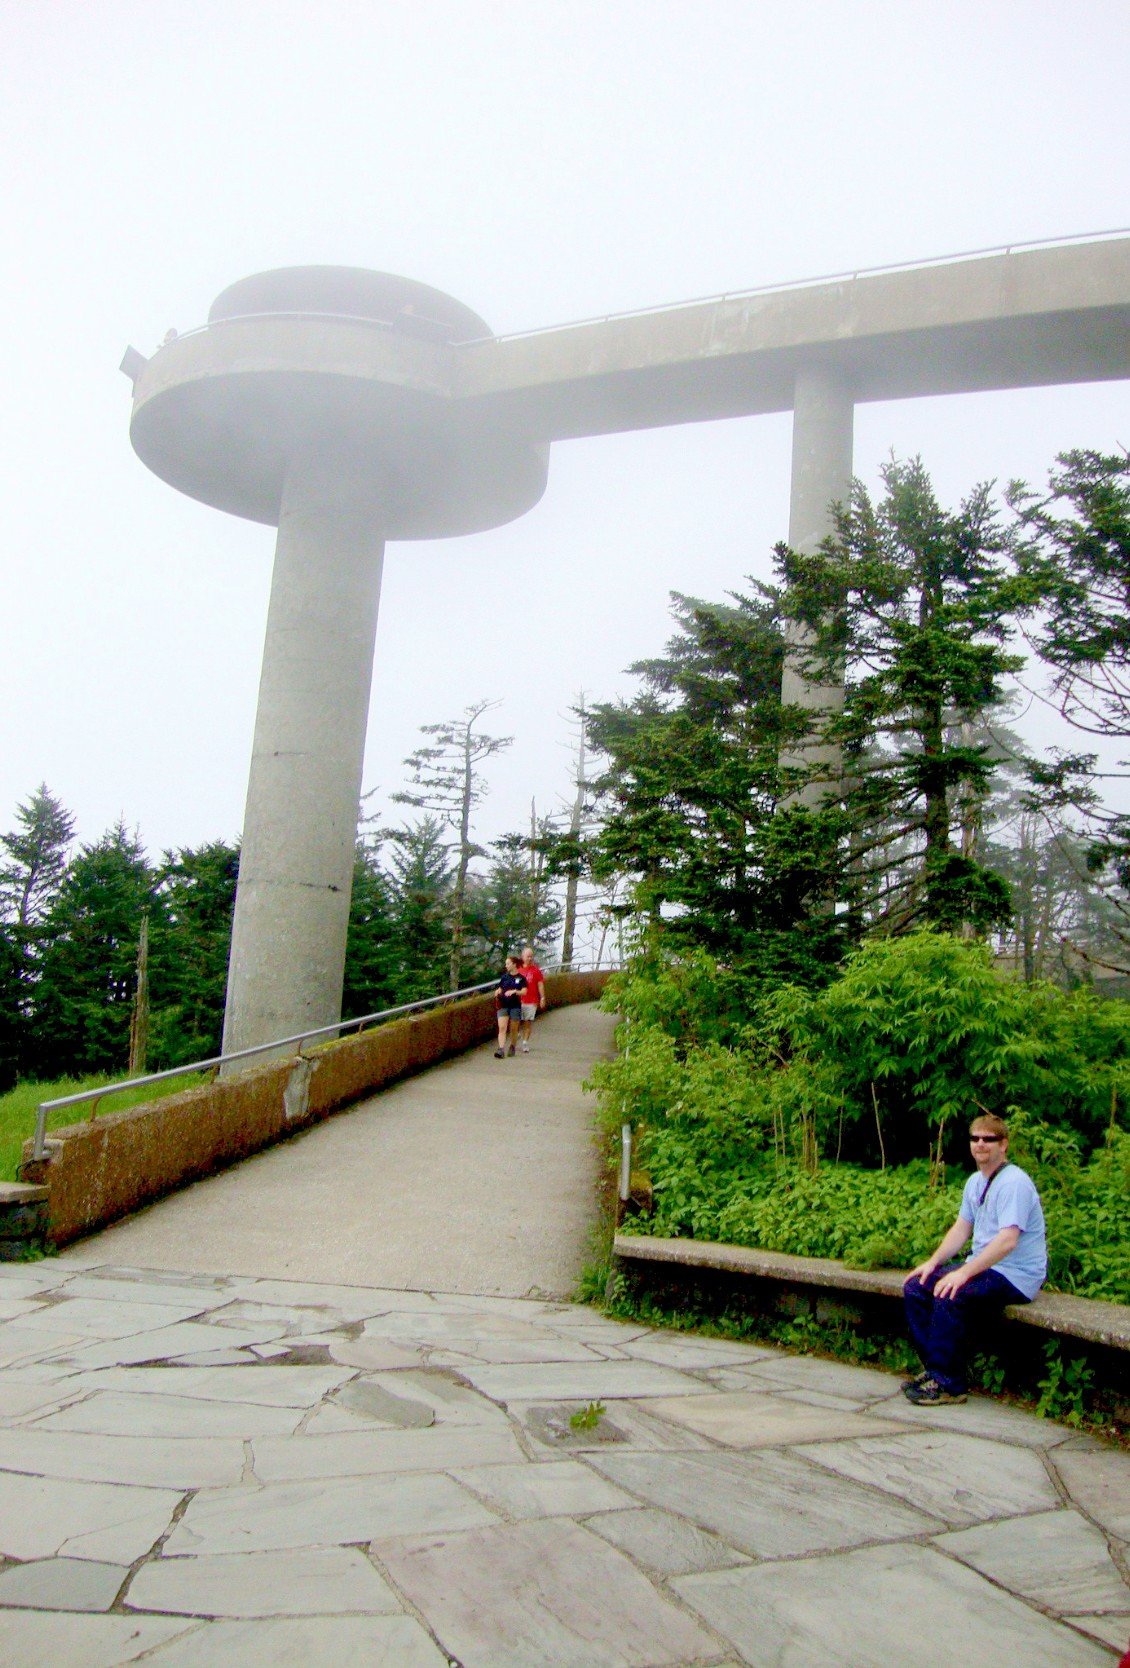 At the Clingmans Dome in Pigeon Forge, TN